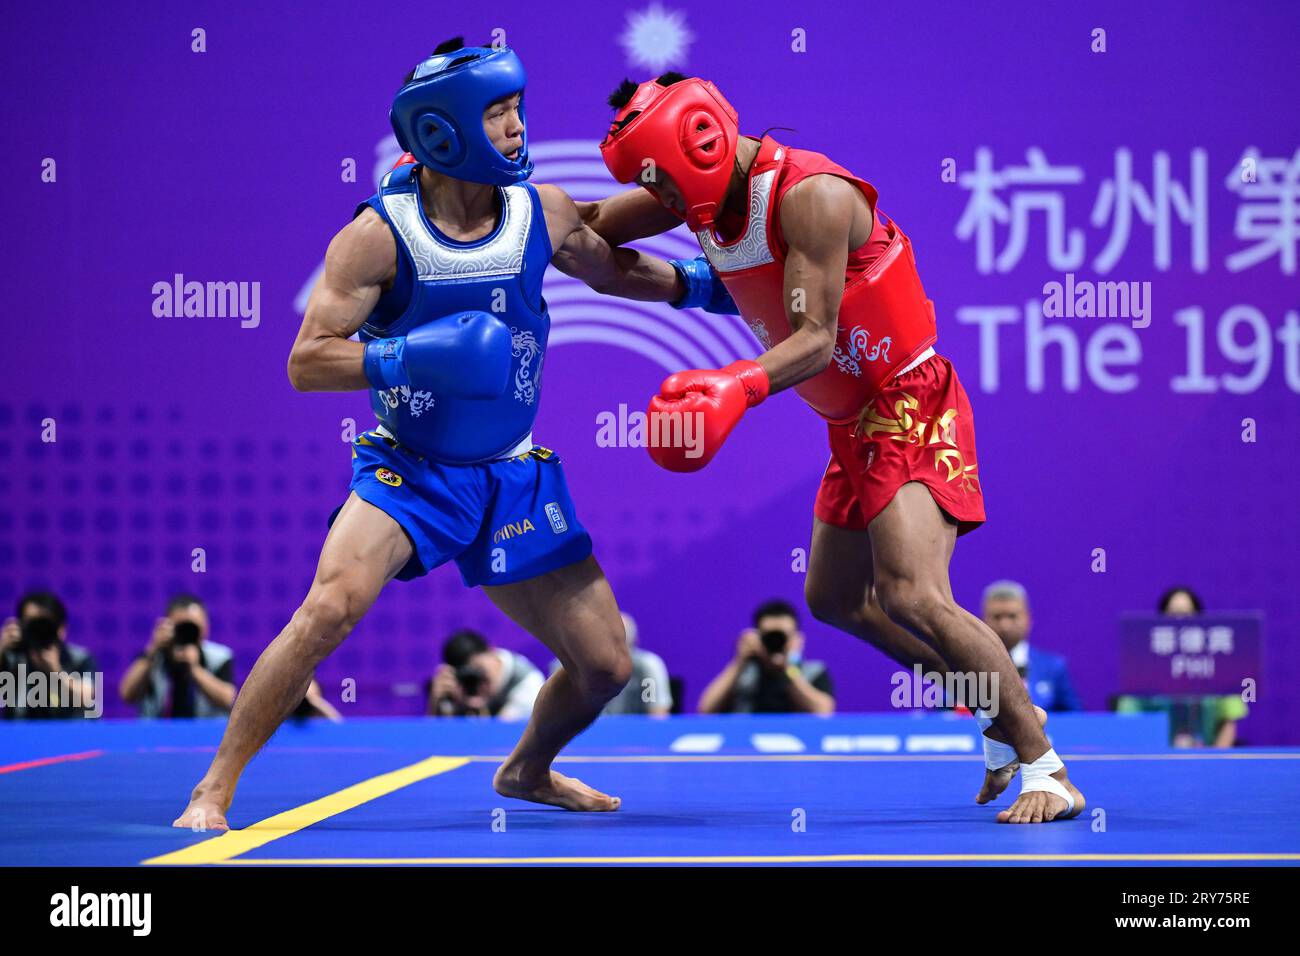 Hangzhou, China. 29th Sep, 2023. Arnel Mandal (R) of the Philippines and Jiang Haidong (L) of China compete during the Asian Games 2023, Wushu Sanda Men's 56Kg Final match at Xiaoshan Guali Sports Centre. Jiang won the match by point difference. (Photo by Luis Veniegra/SOPA Images/Sipa USA) Credit: Sipa USA/Alamy Live News Stock Photo